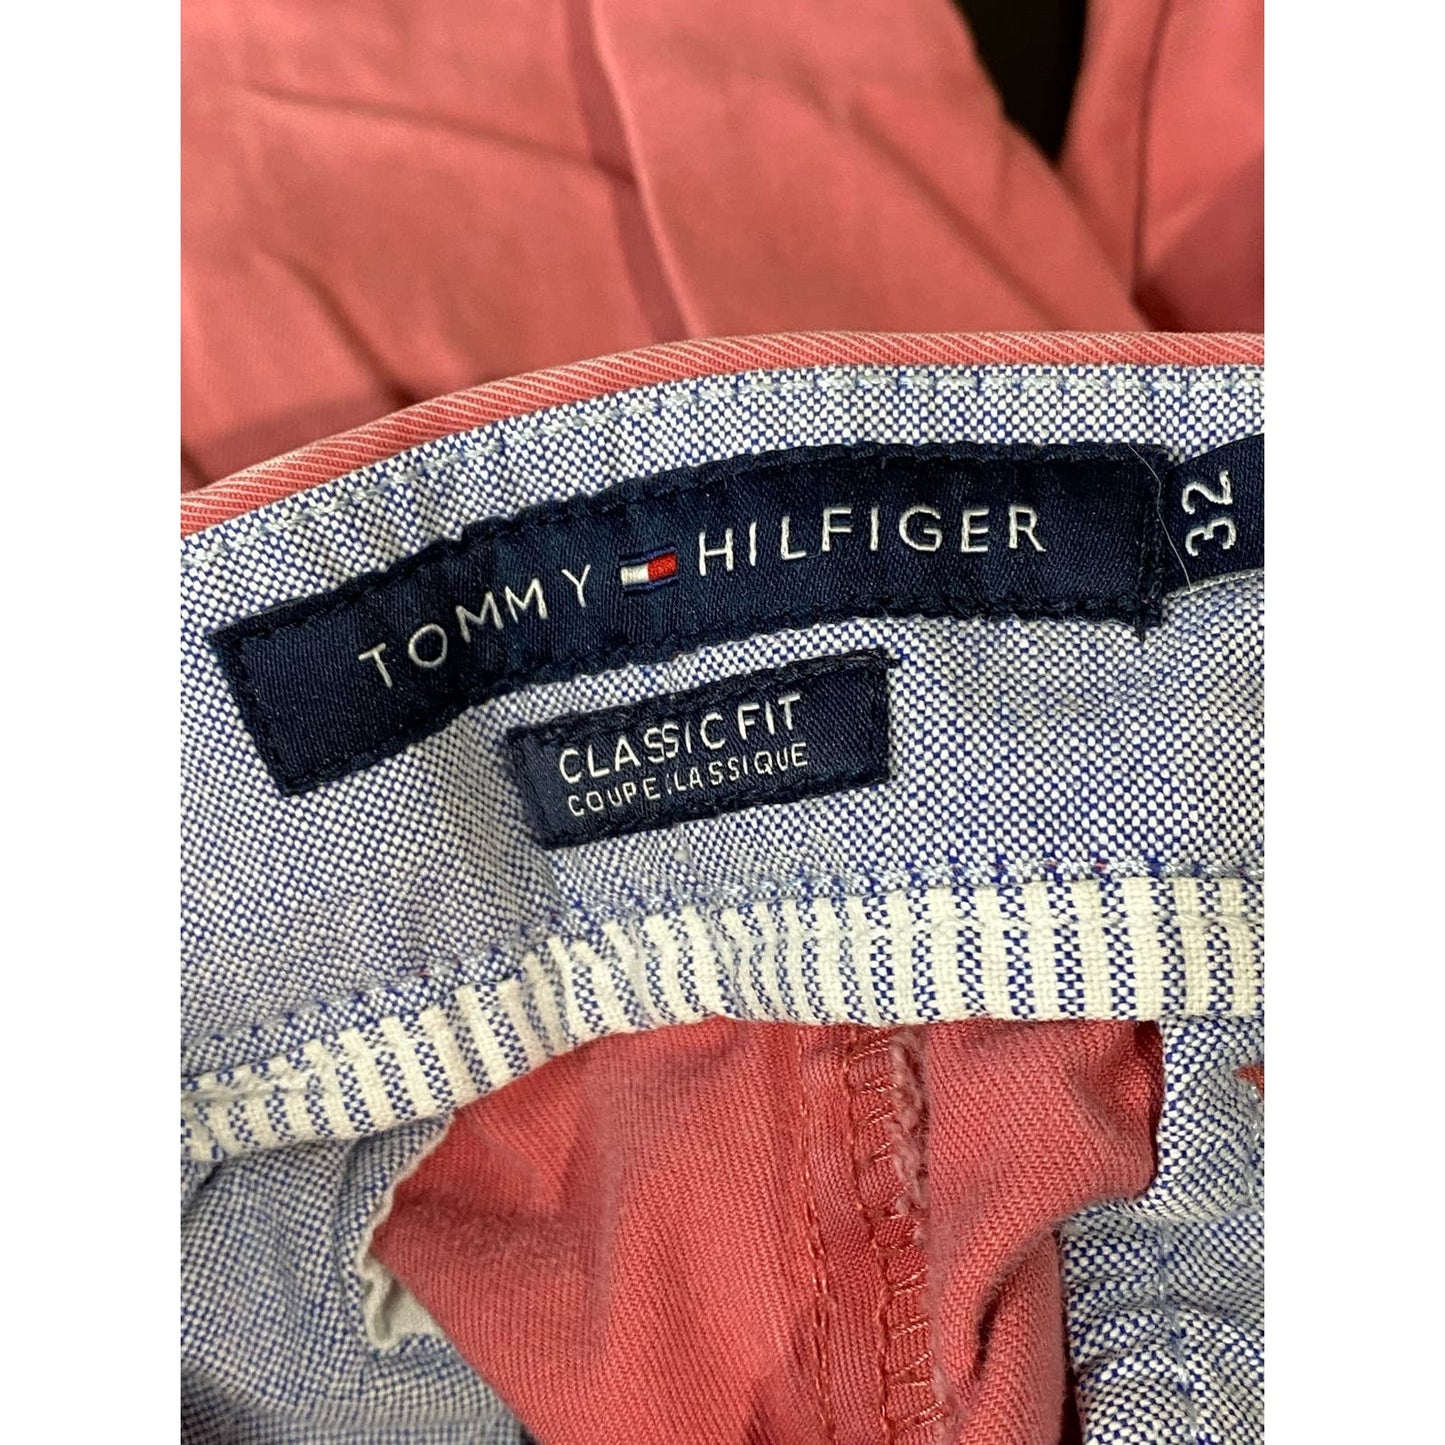 TOMMY HILFIGER Men's Red Cotton Classic-Fit Four-Pocket Chino Shorts SZ 32